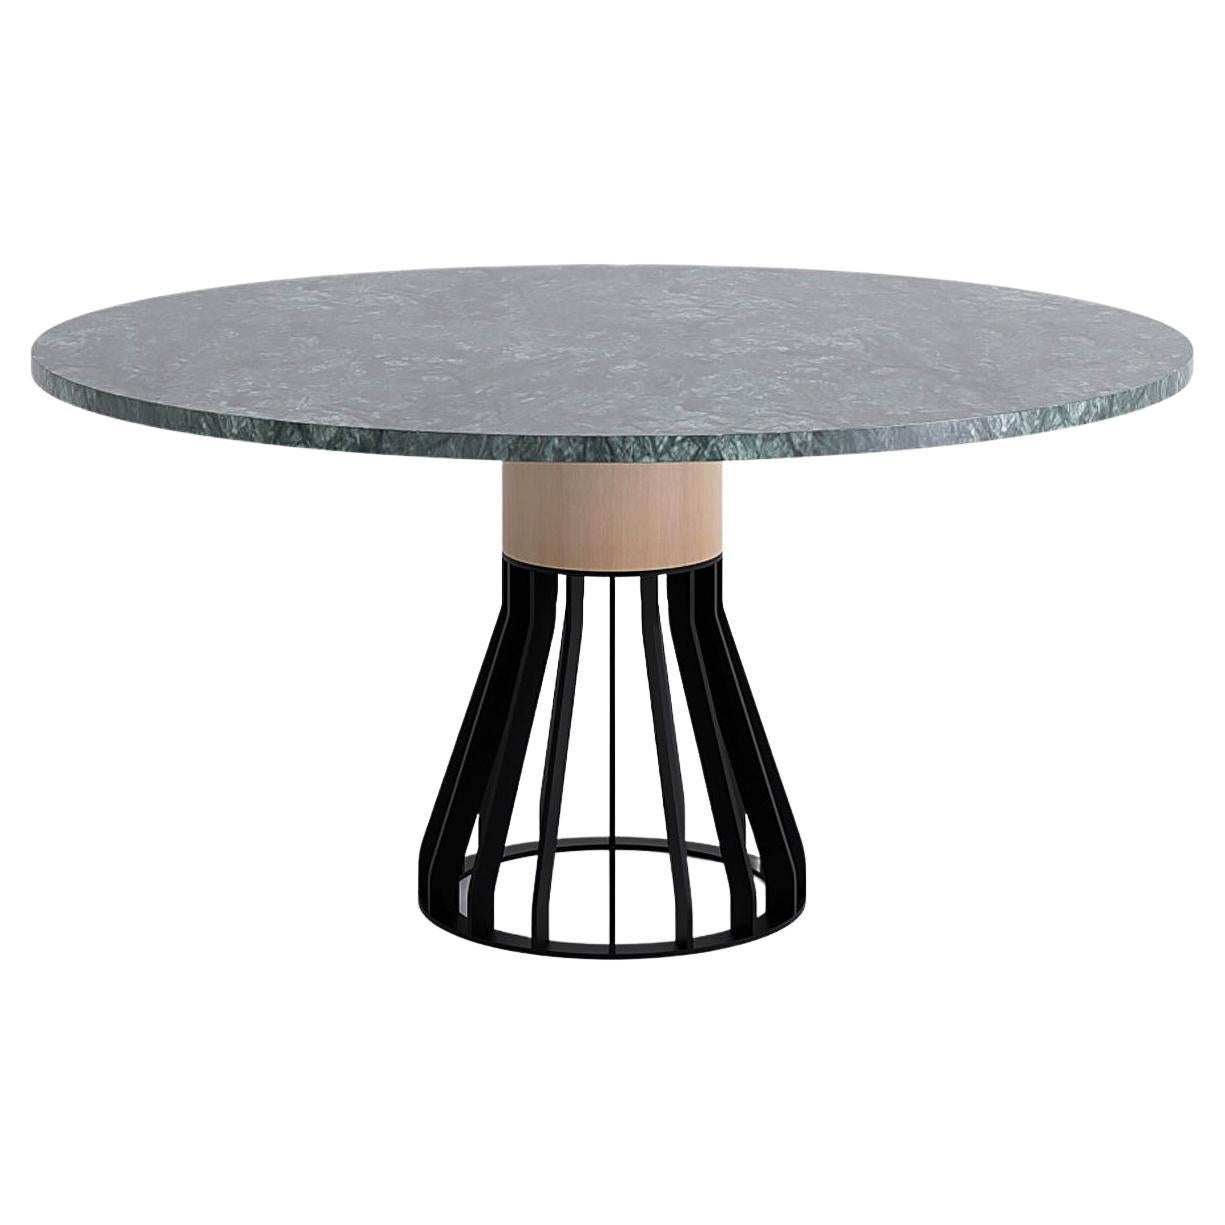 Mewoma Dining Table, Black Legs Green Top by Jonah Takagi for La Chance For Sale